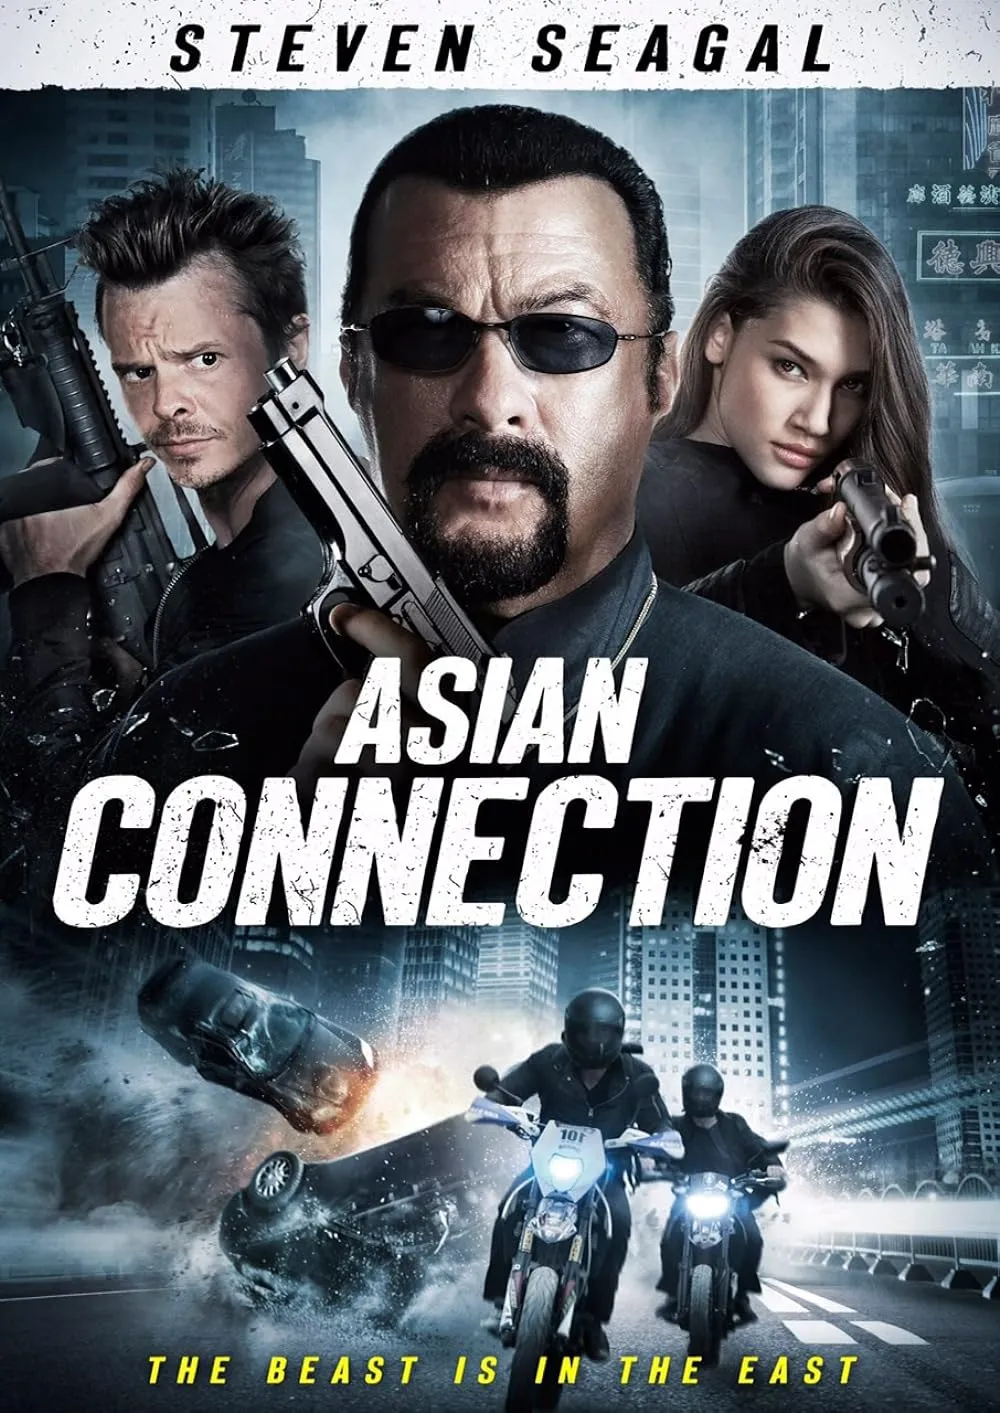 The Asian Connection 2016 Hindi ORG Dual Audio 480p BluRay ESub 400MB Download